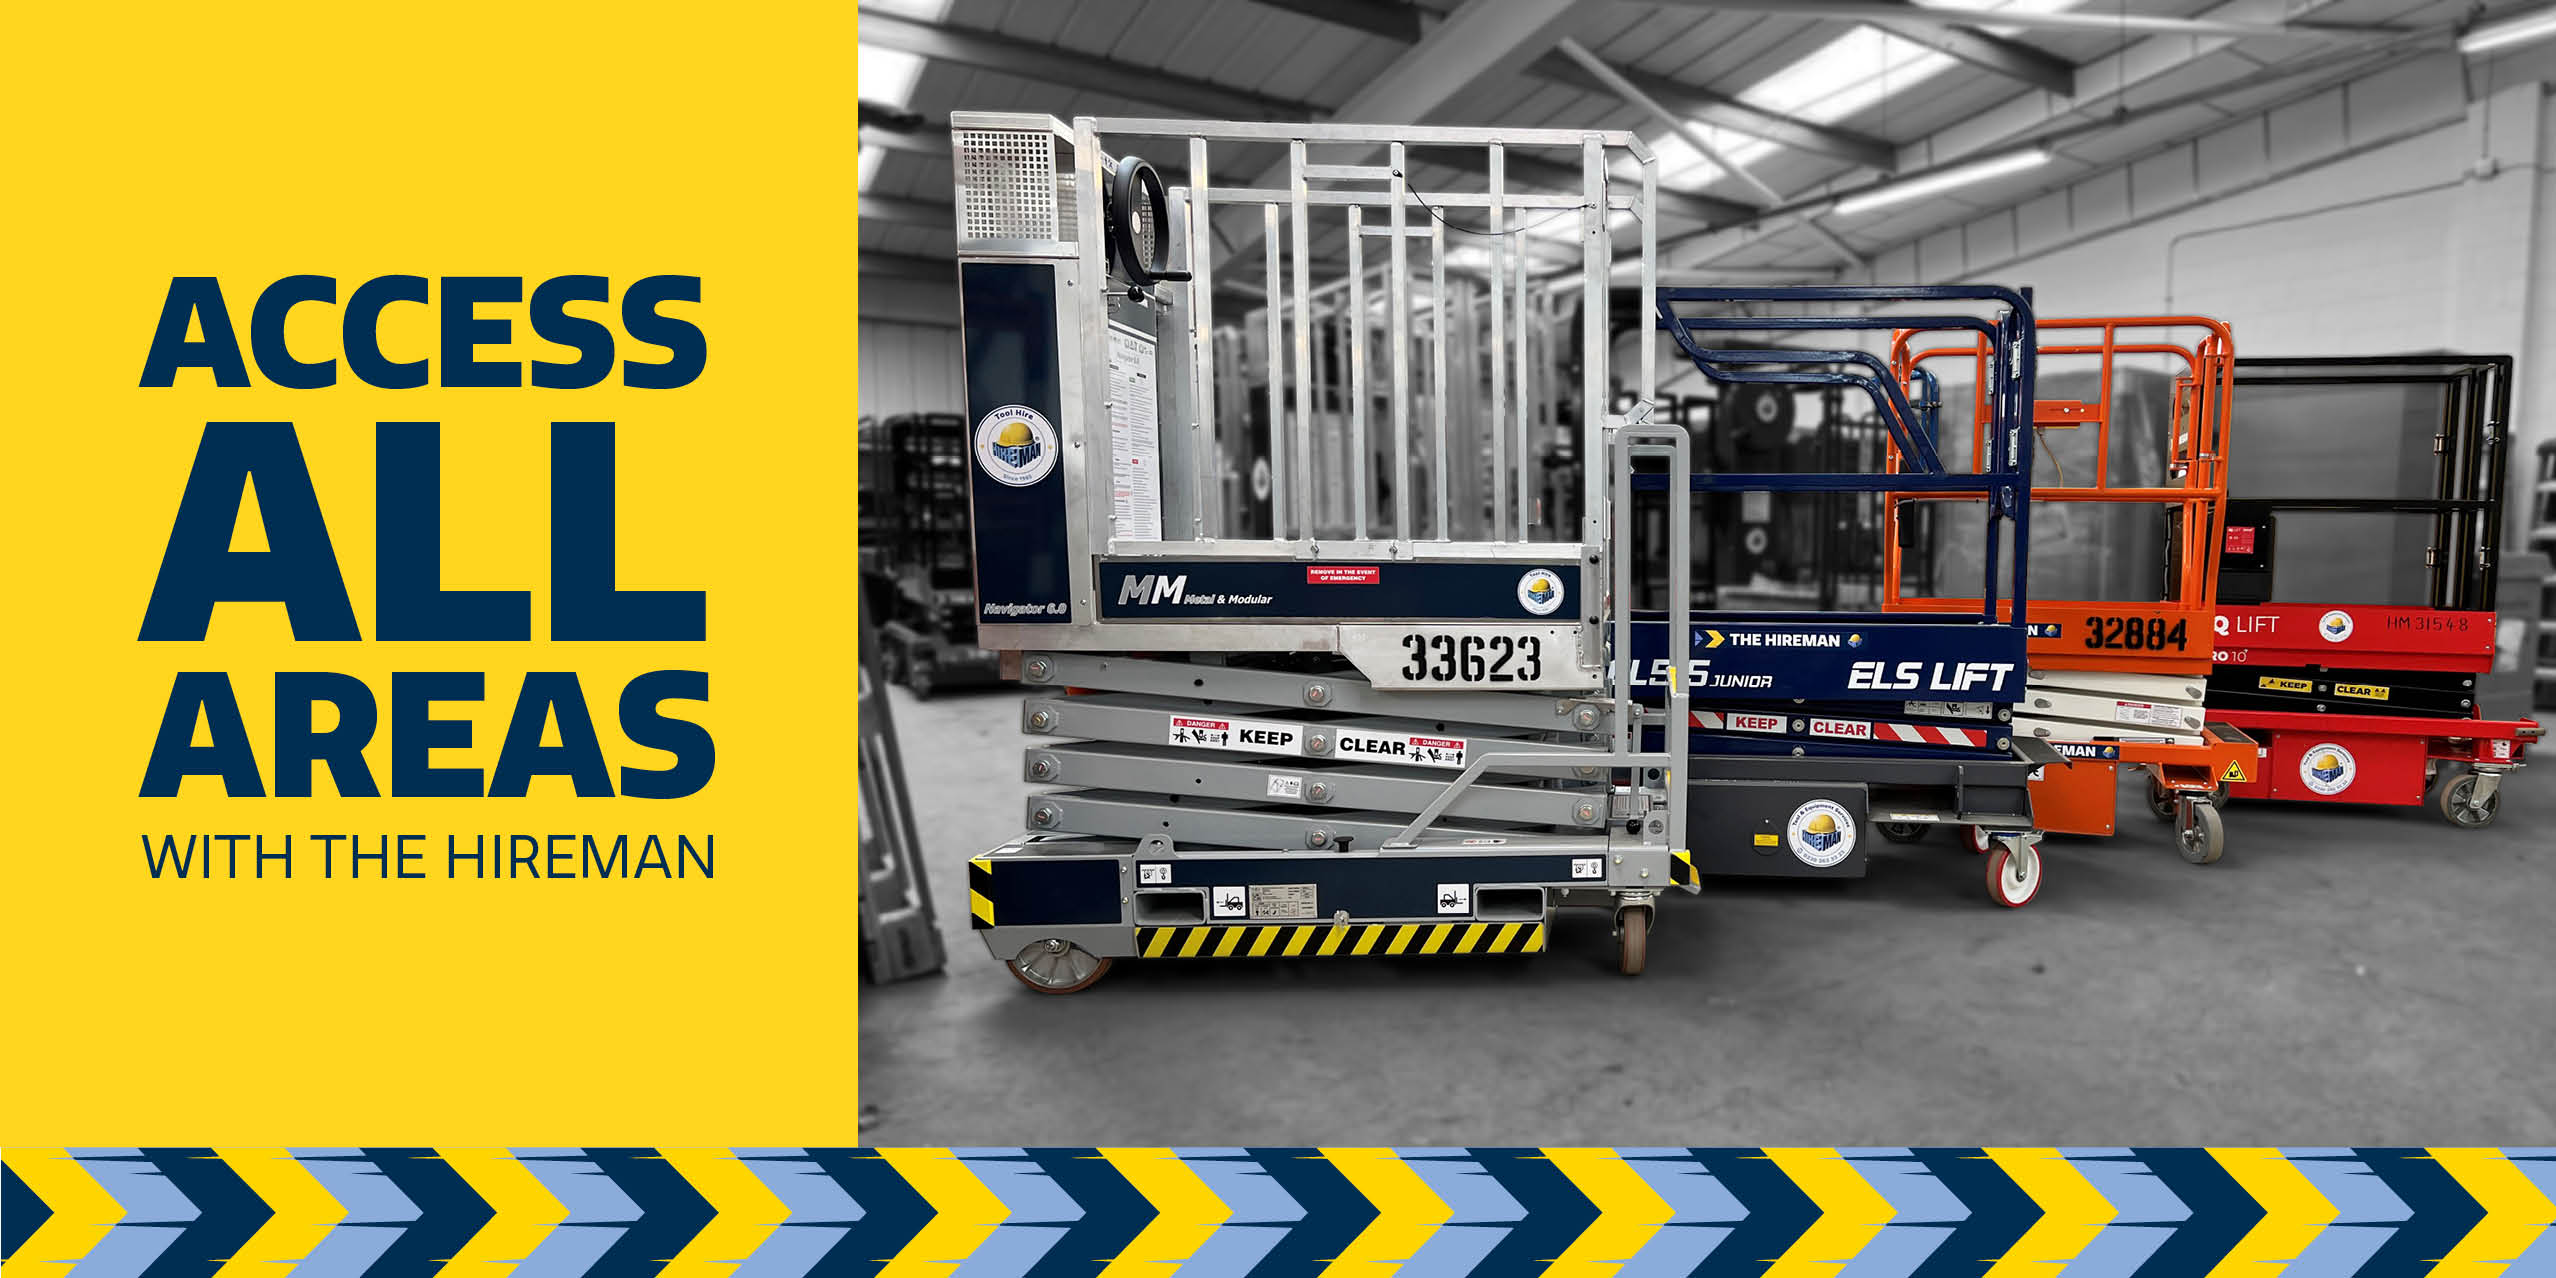 Access all areas with the hireman